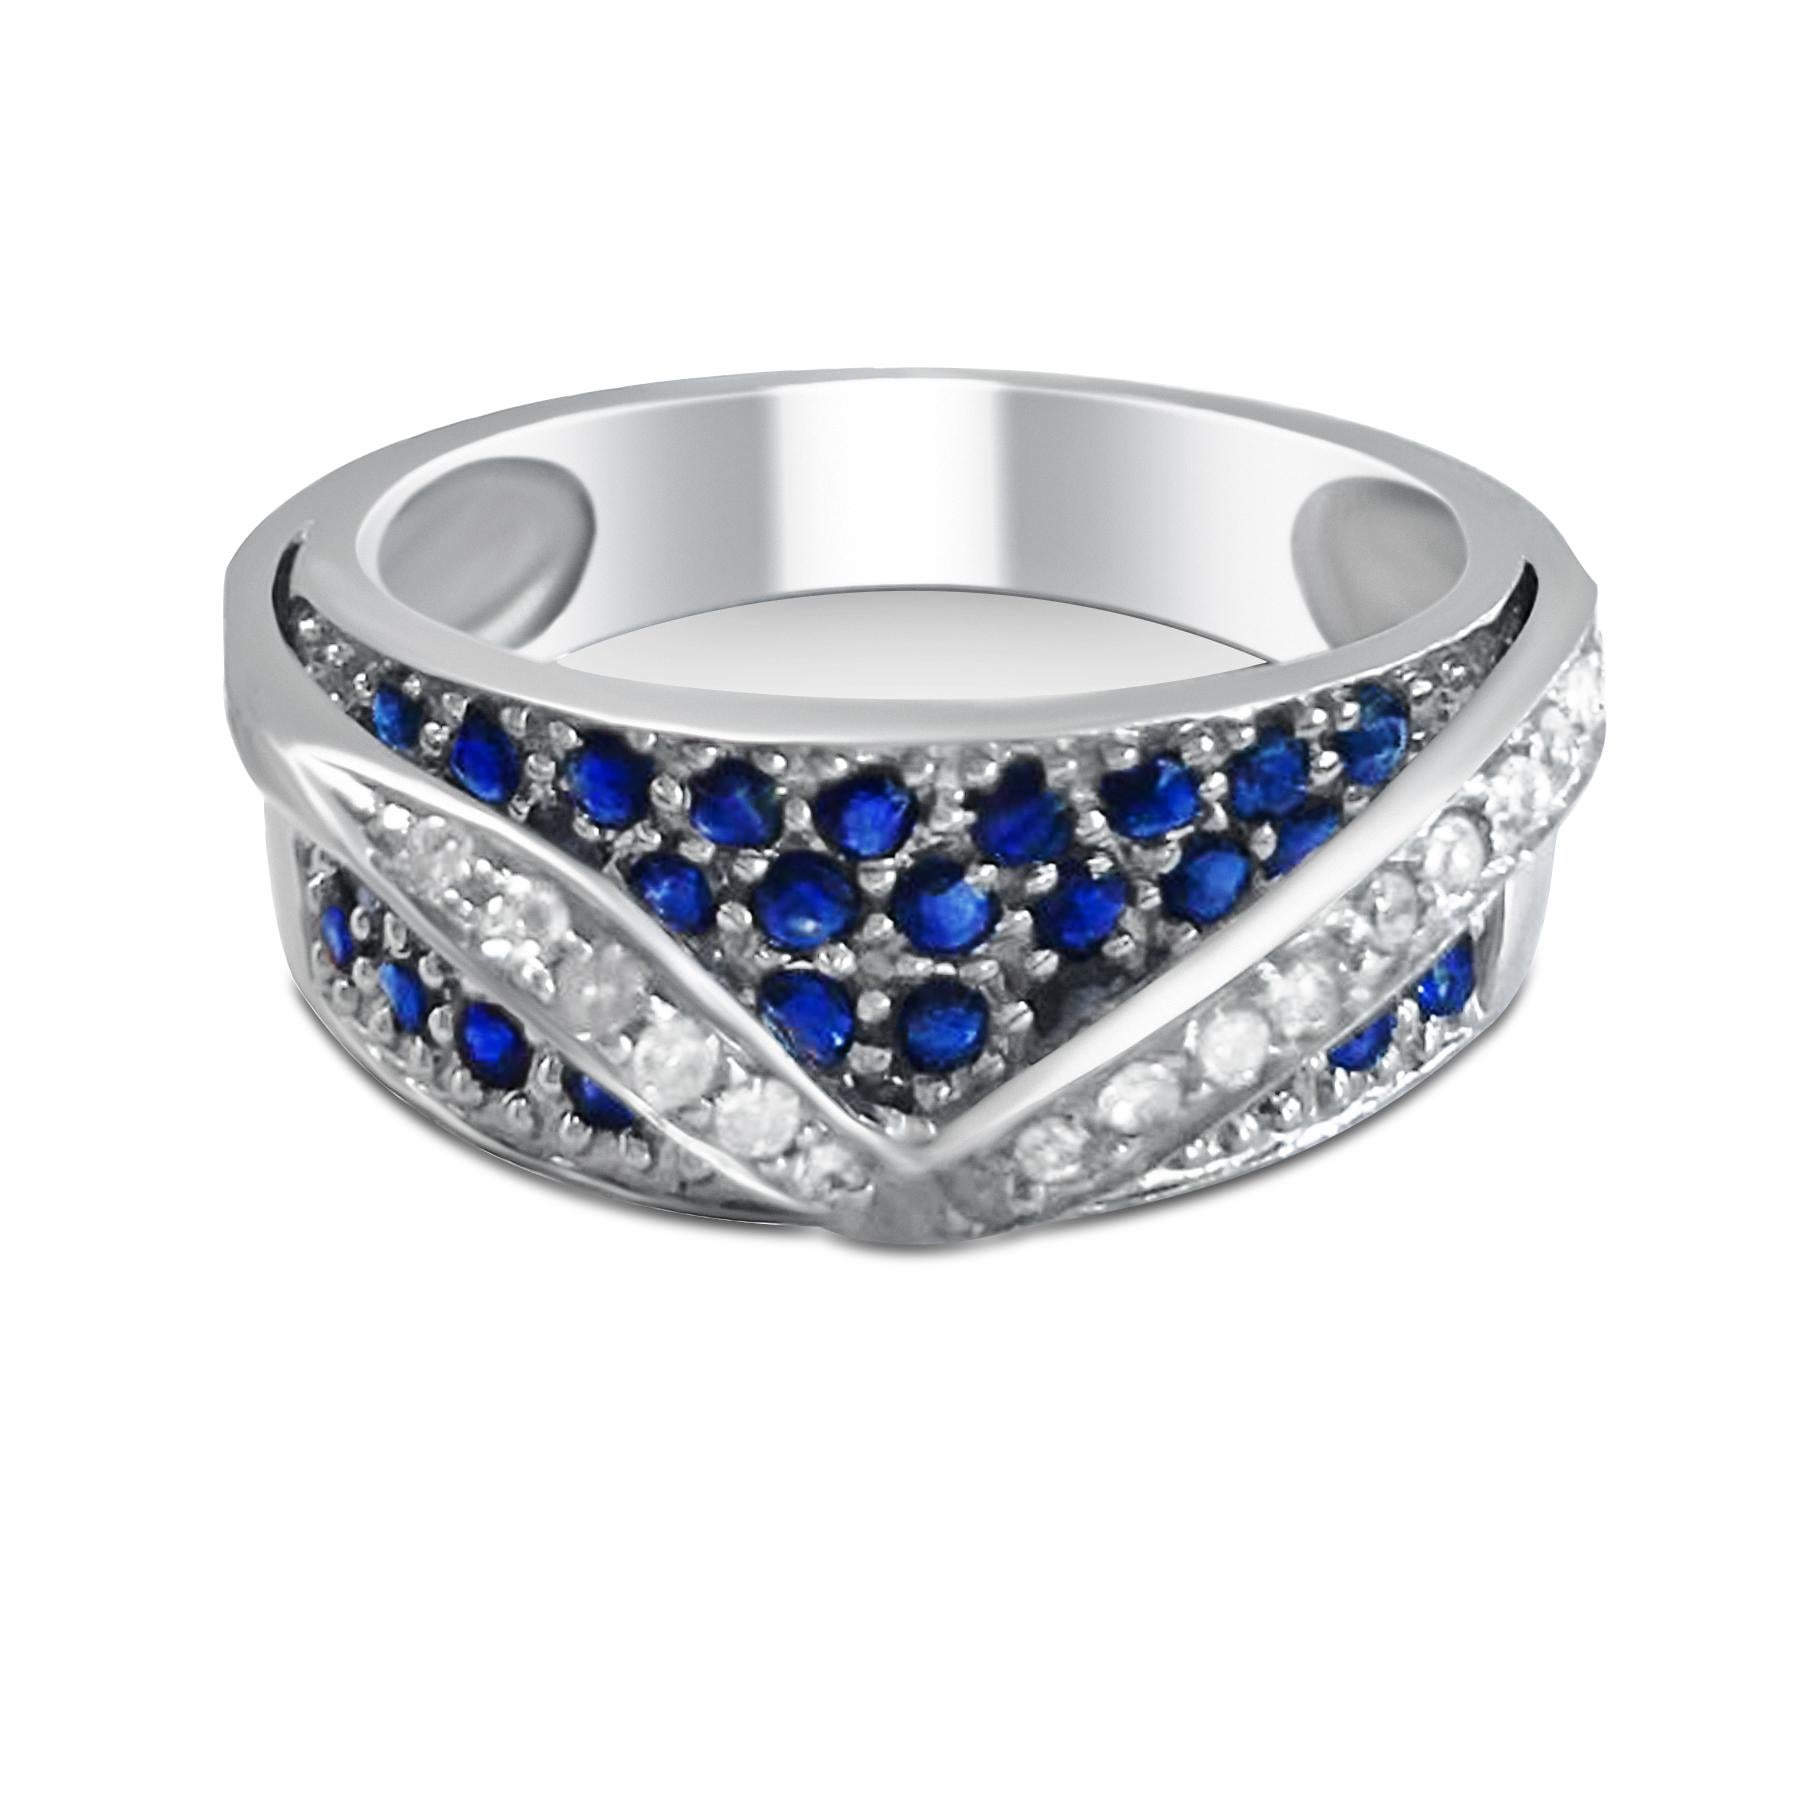 14 Karat White Gold Diamond and Sapphire Ring In New Condition For Sale In Jackson Heights, NY